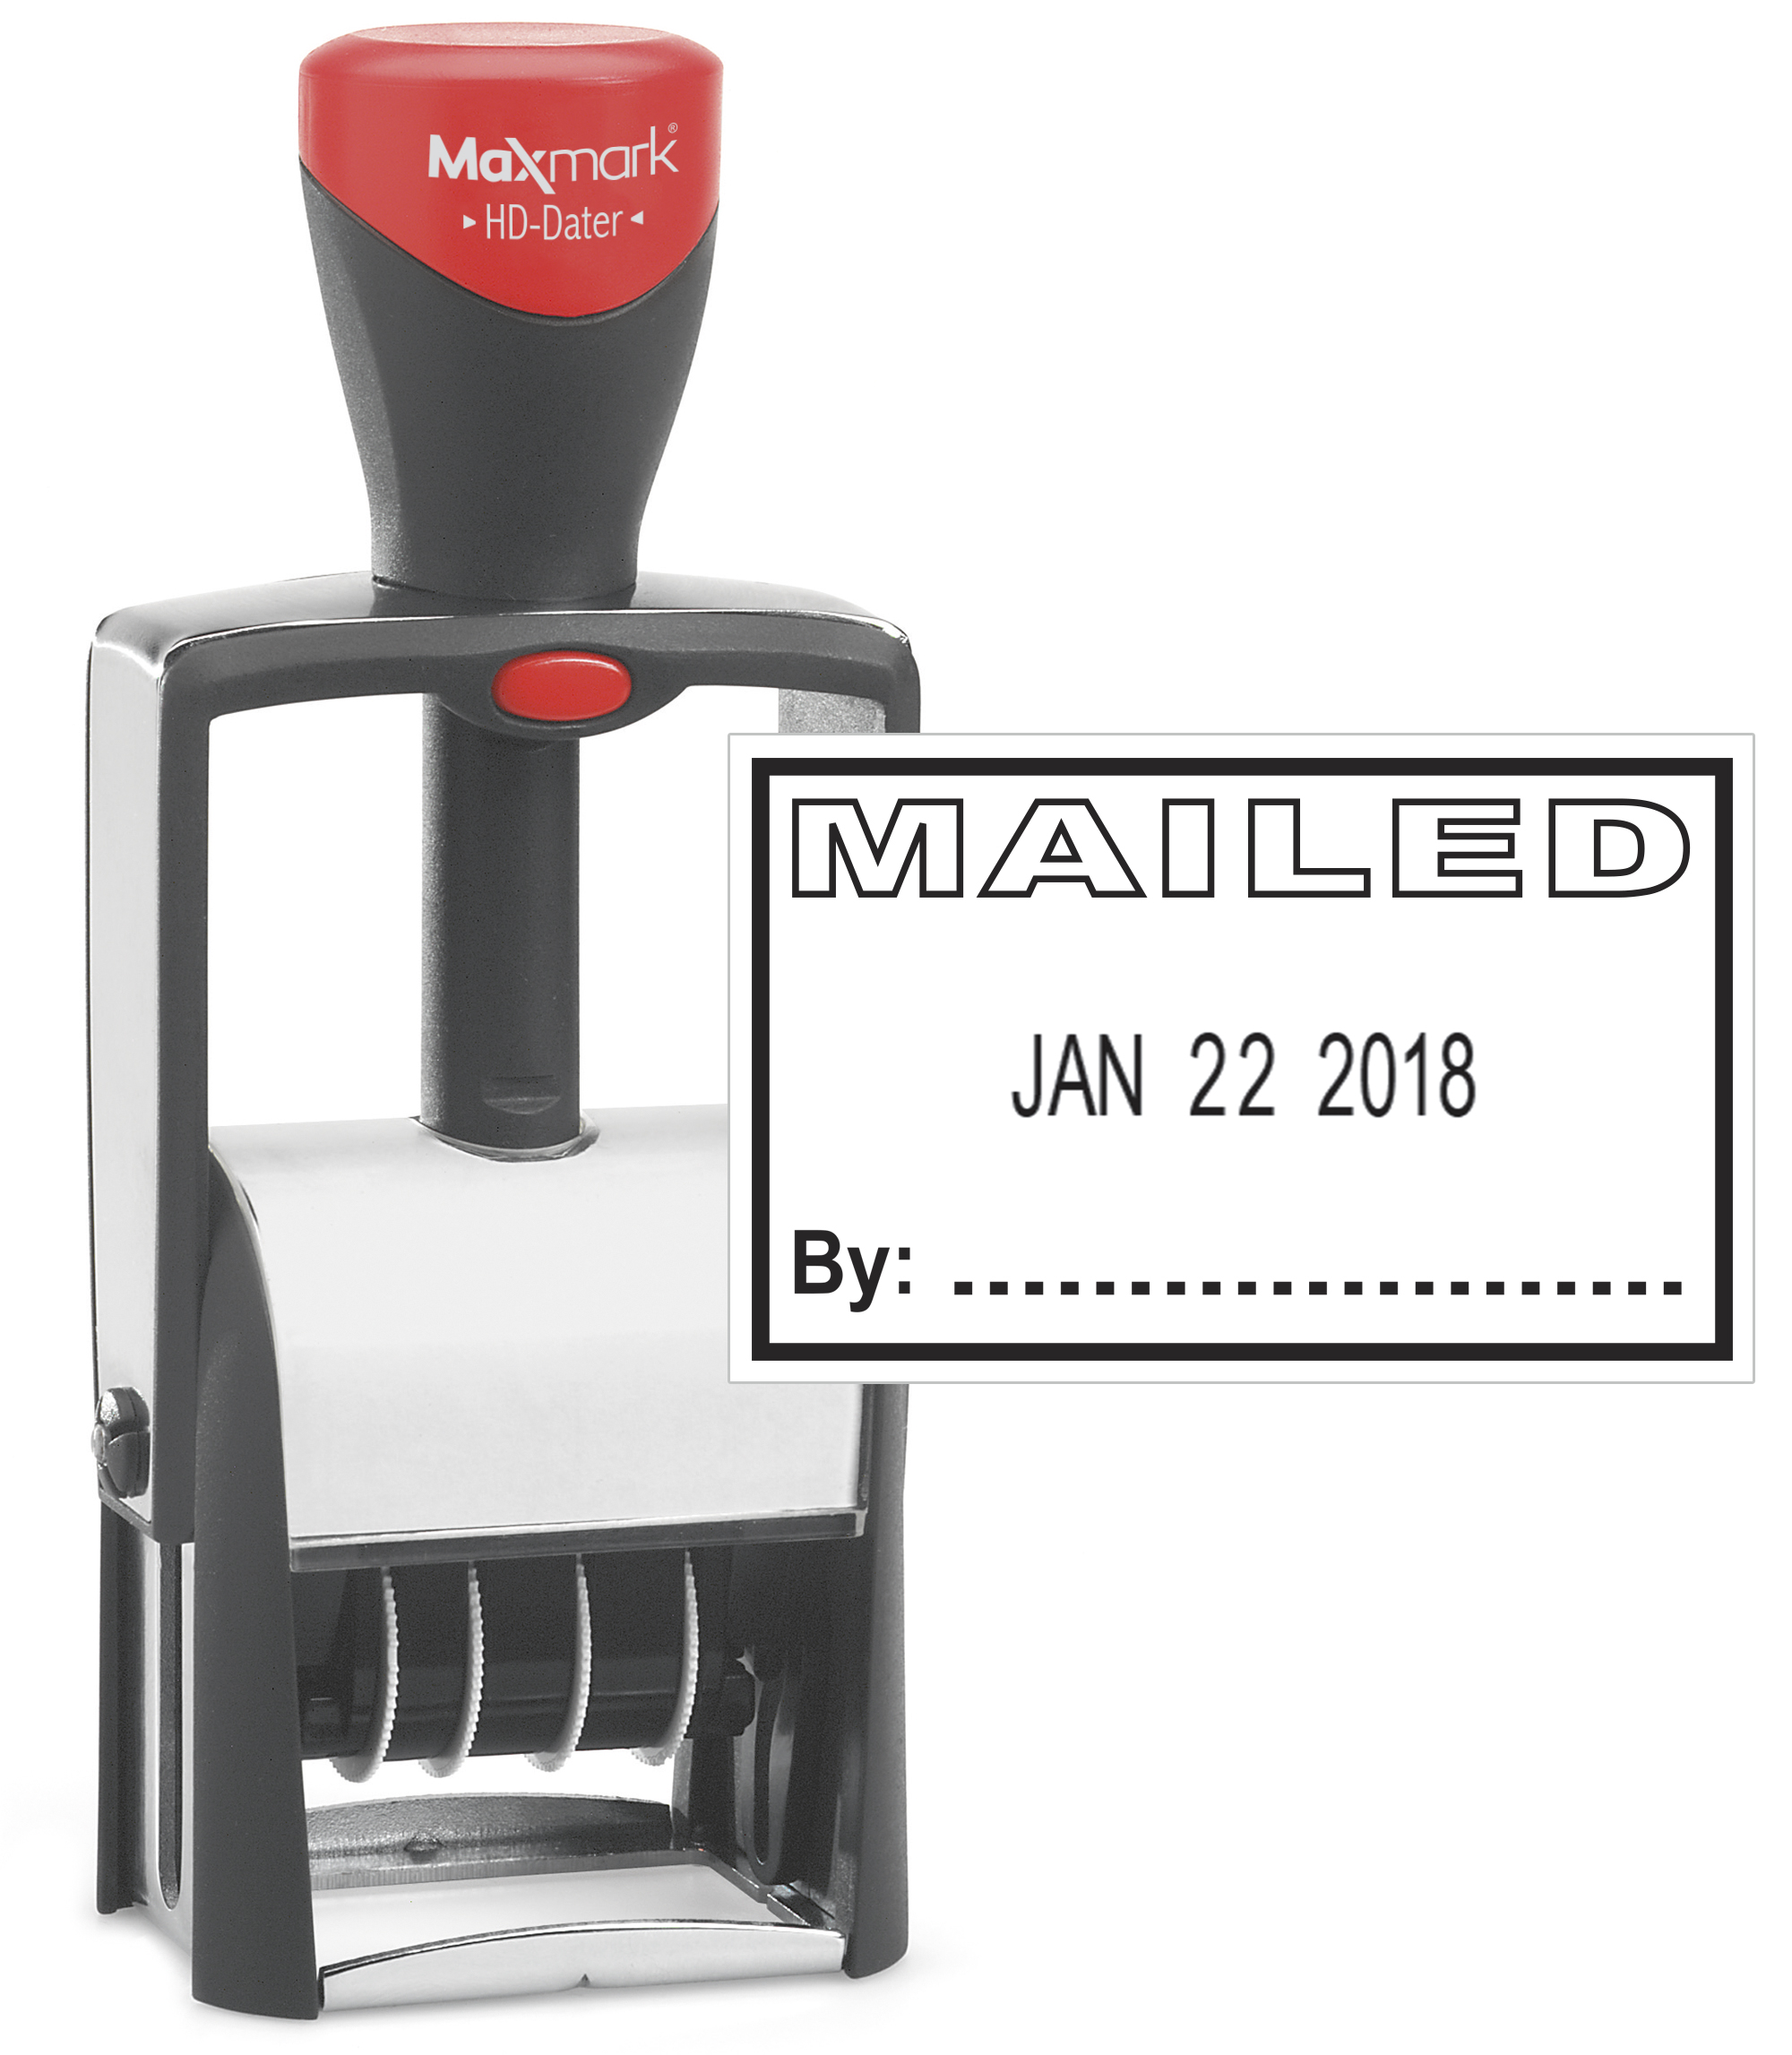 Heavy Duty Date Stamp with "MAILED" Self Inking Stamp - BLACK Ink